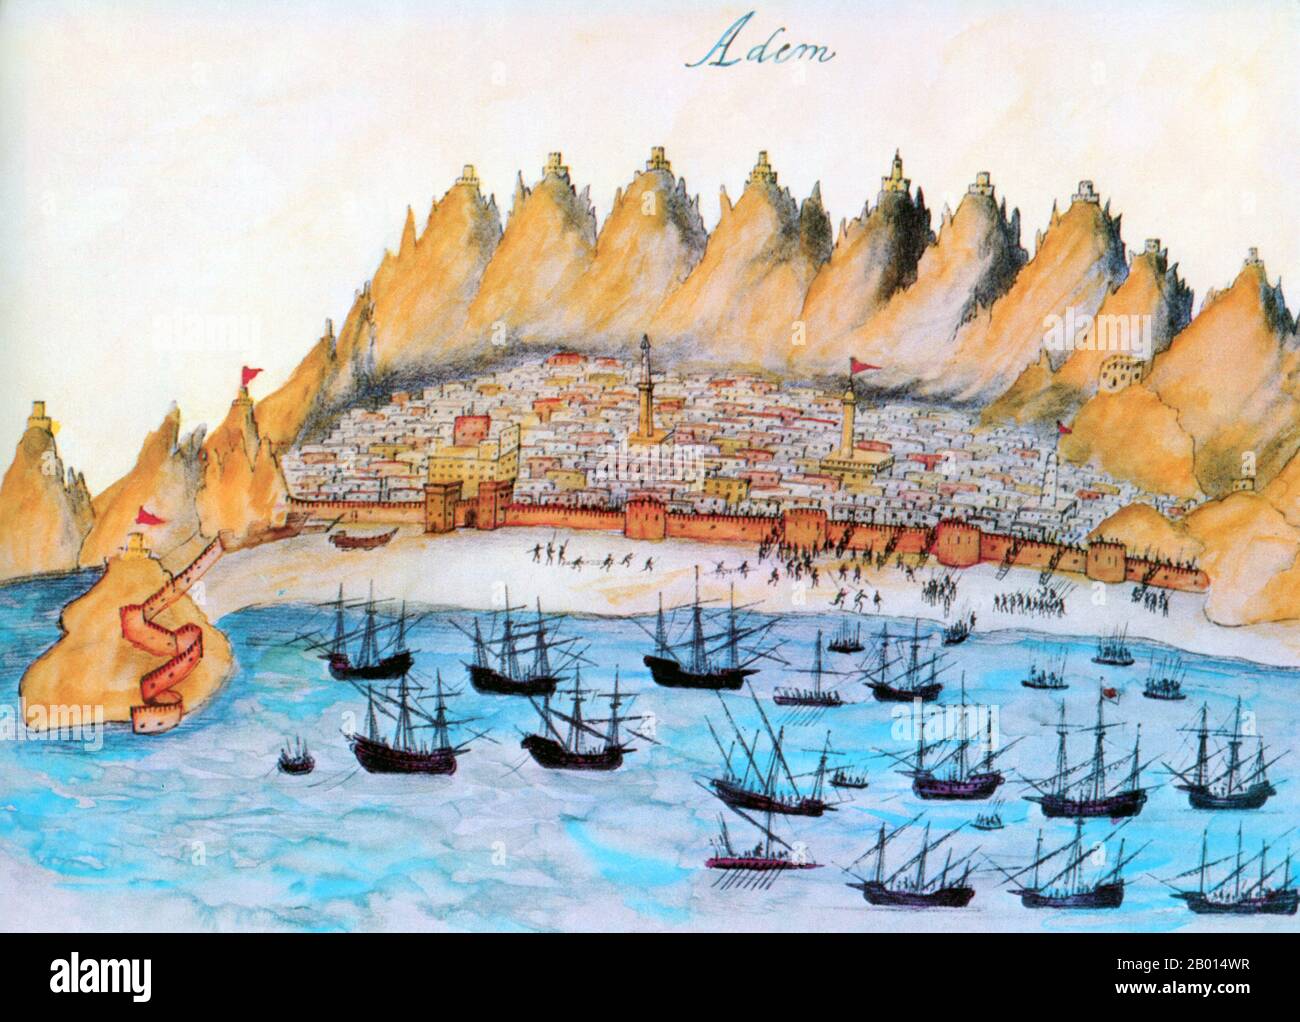 Yemen/Portugal: Albuquerque’s naval forces attack the Arabic port of Aden in February 1513. Coloured woodcut illustration from 'Lendas da India' (Legends of India) by Gaspa Correia (c. 1496-1563), 16th century.  Afonso de Albuquerque (1453-1515) was a Portuguese admiral whose military and administrative accomplishments as second governor of Portuguese India established the Portuguese colonial empire in the Indian Ocean. He is generally considered a military genius. Stock Photo